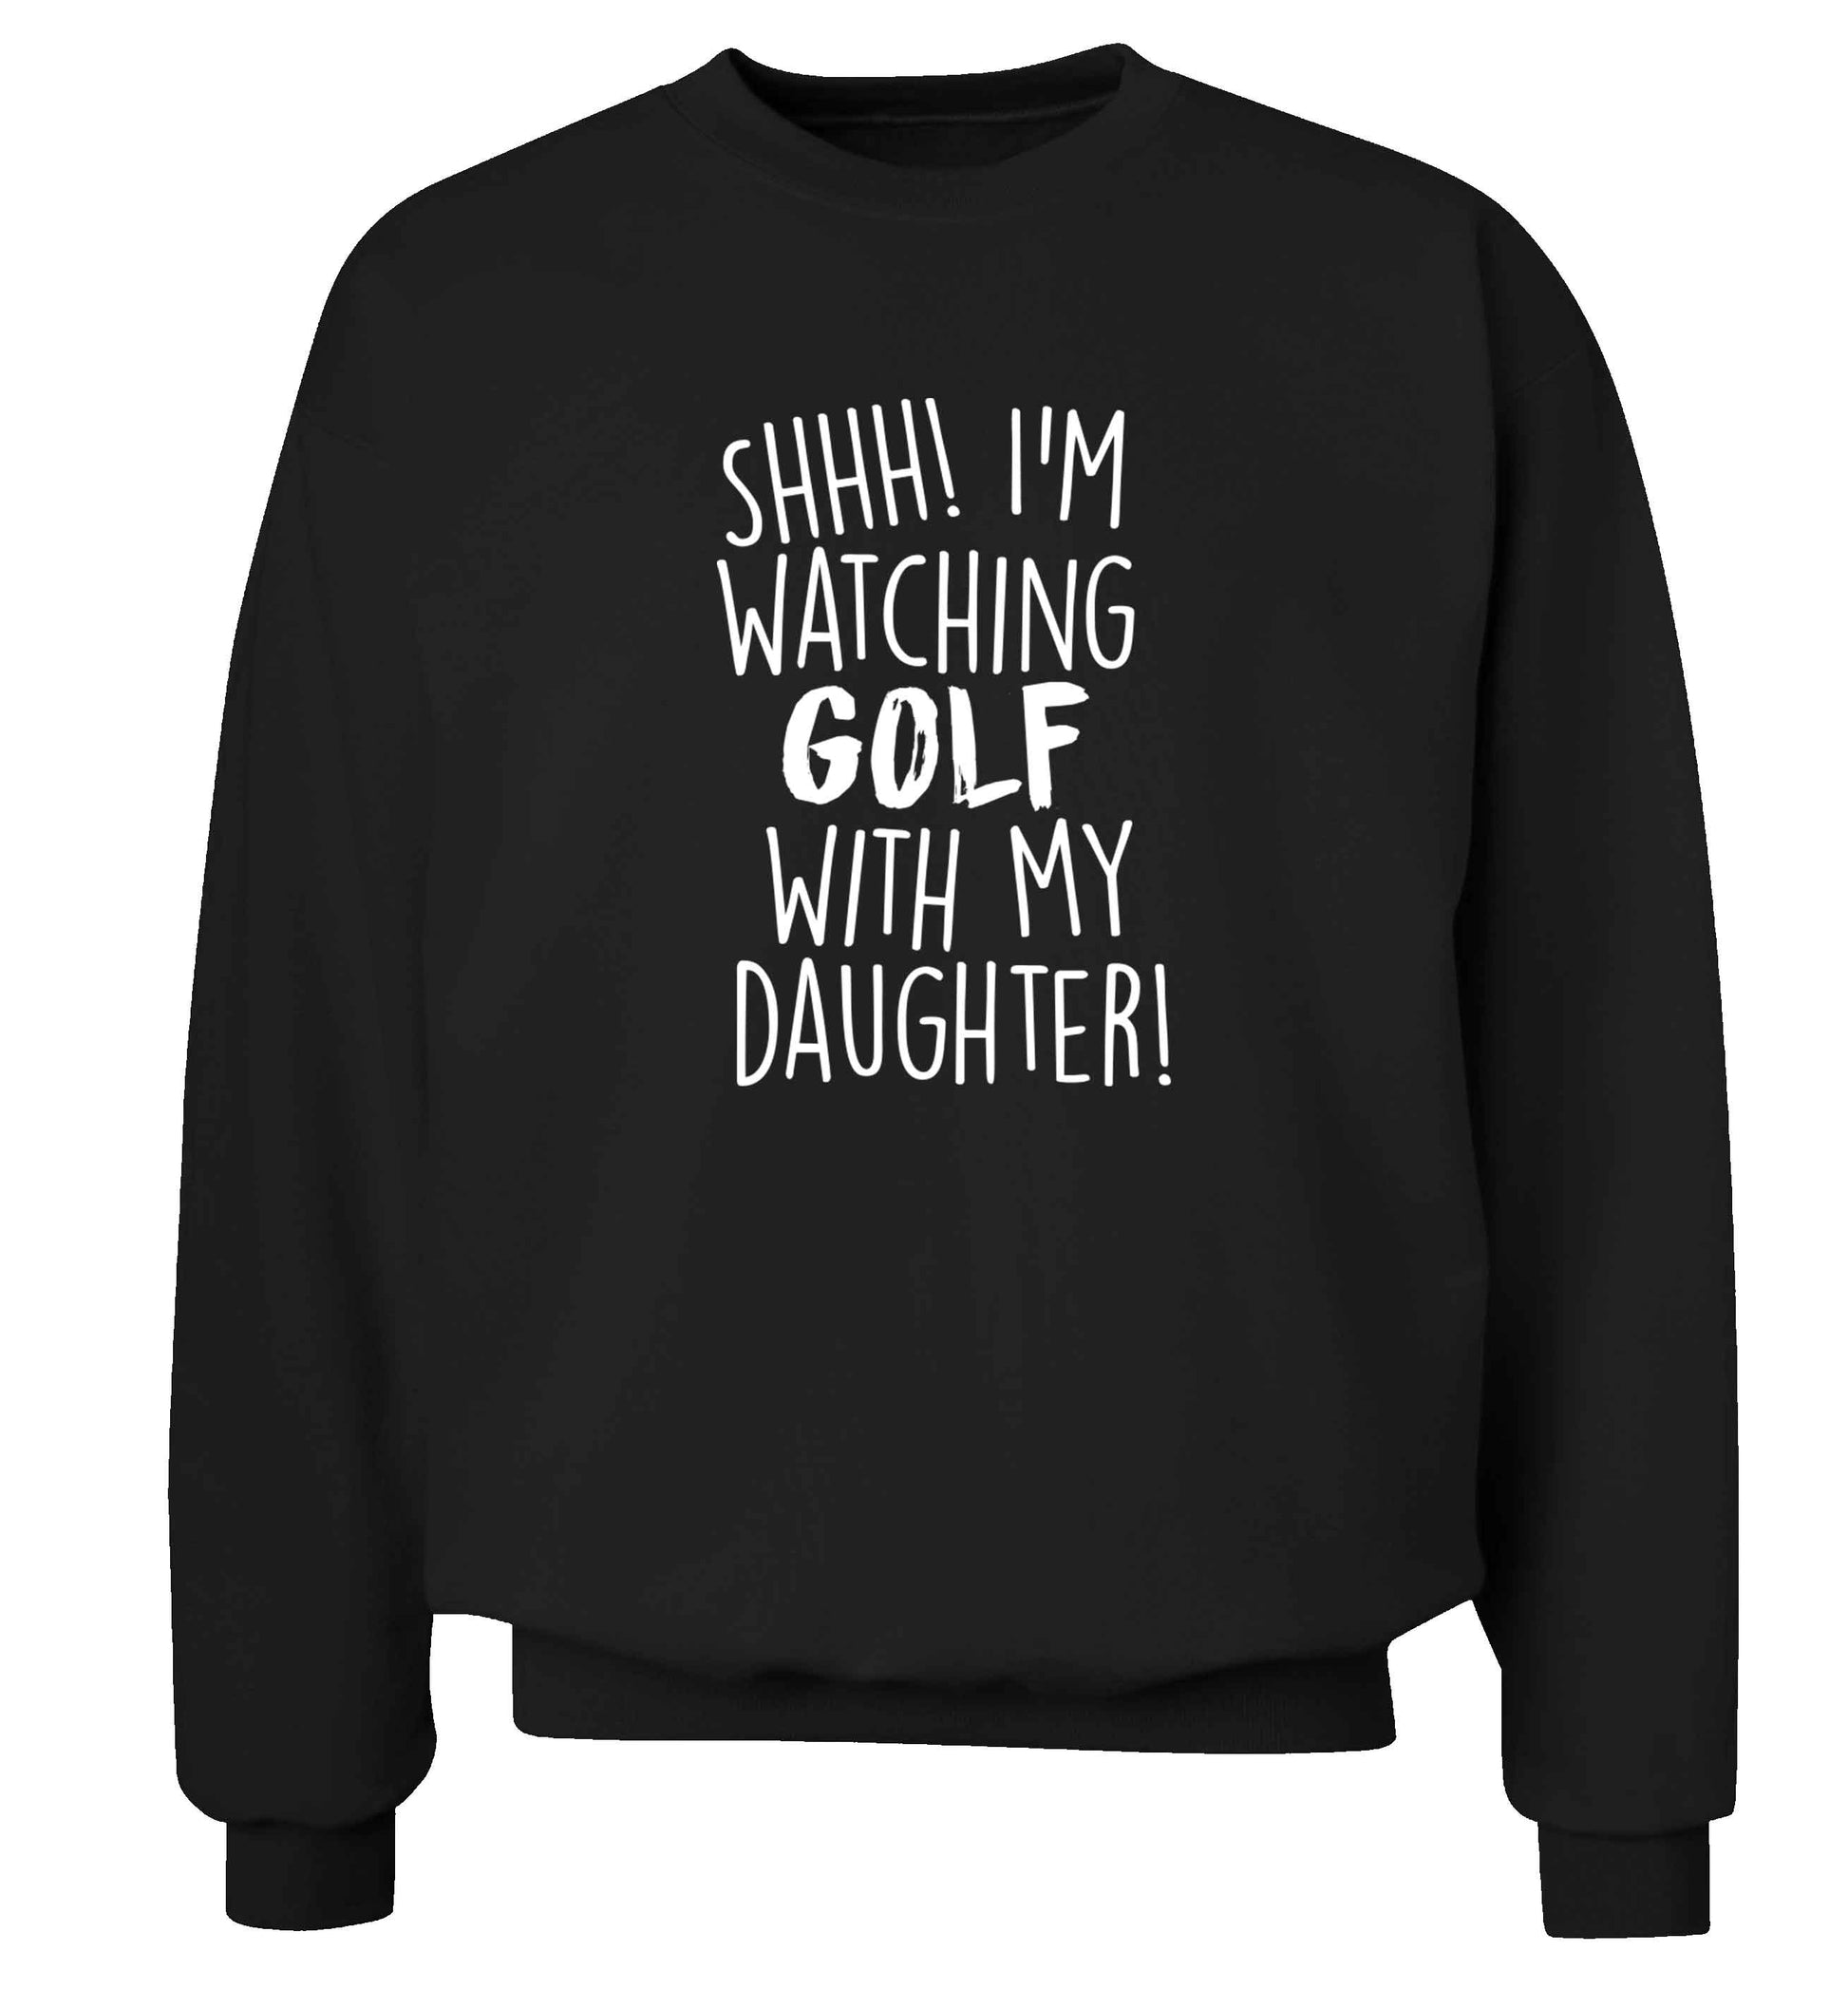 Shh I'm watching golf with my daughter Adult's unisex black Sweater 2XL